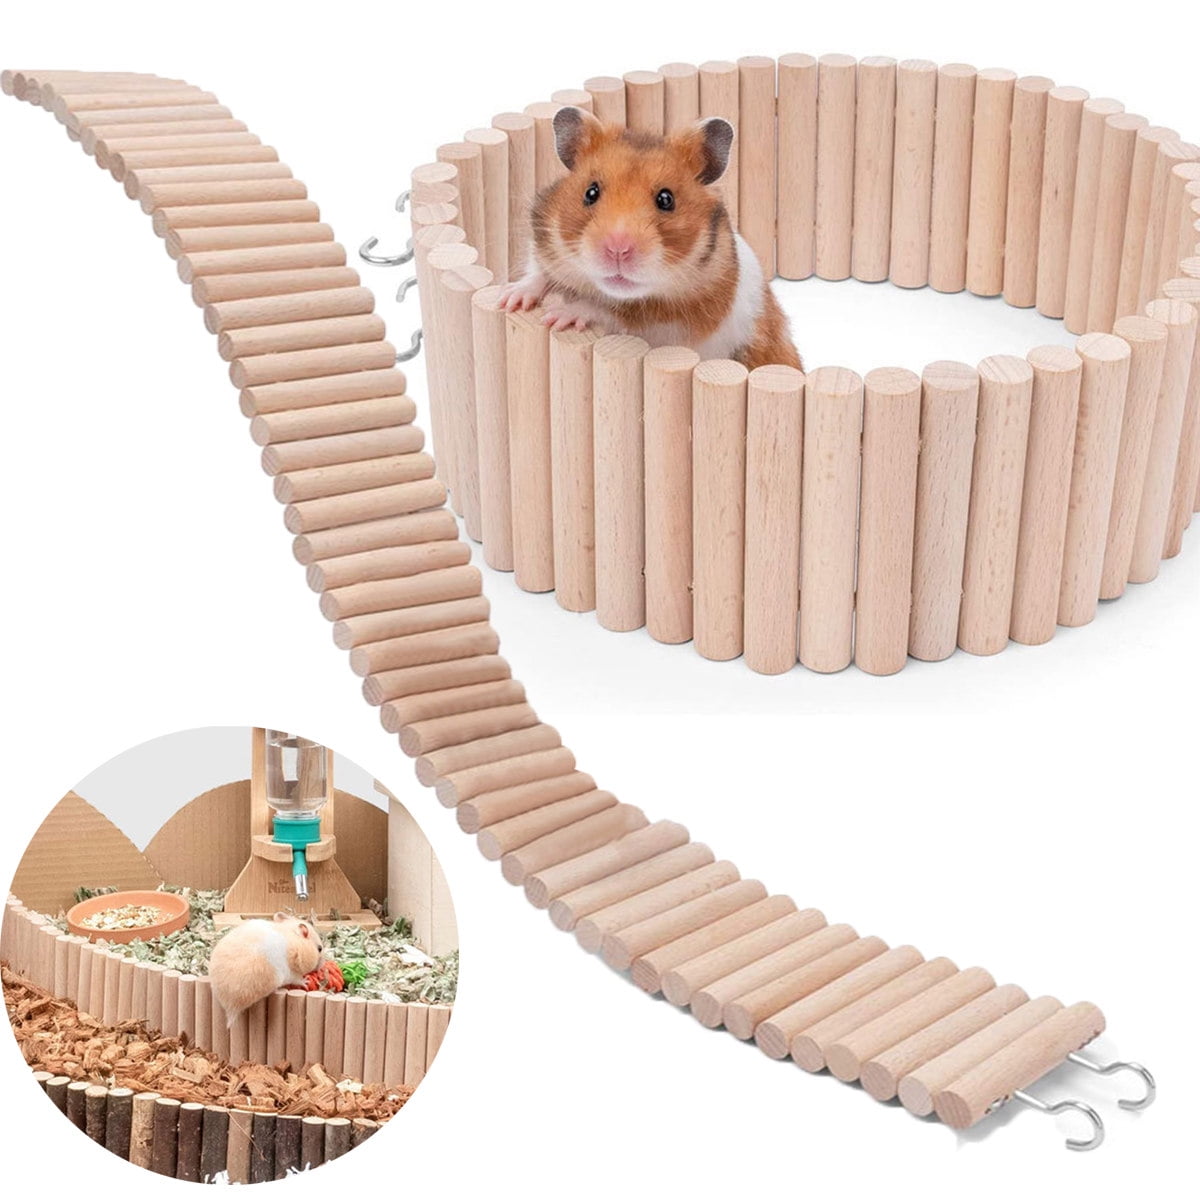 Hamster Eco-friendly Hamster Climbing Cage Exercise Playground Toy Wooden Bridge 